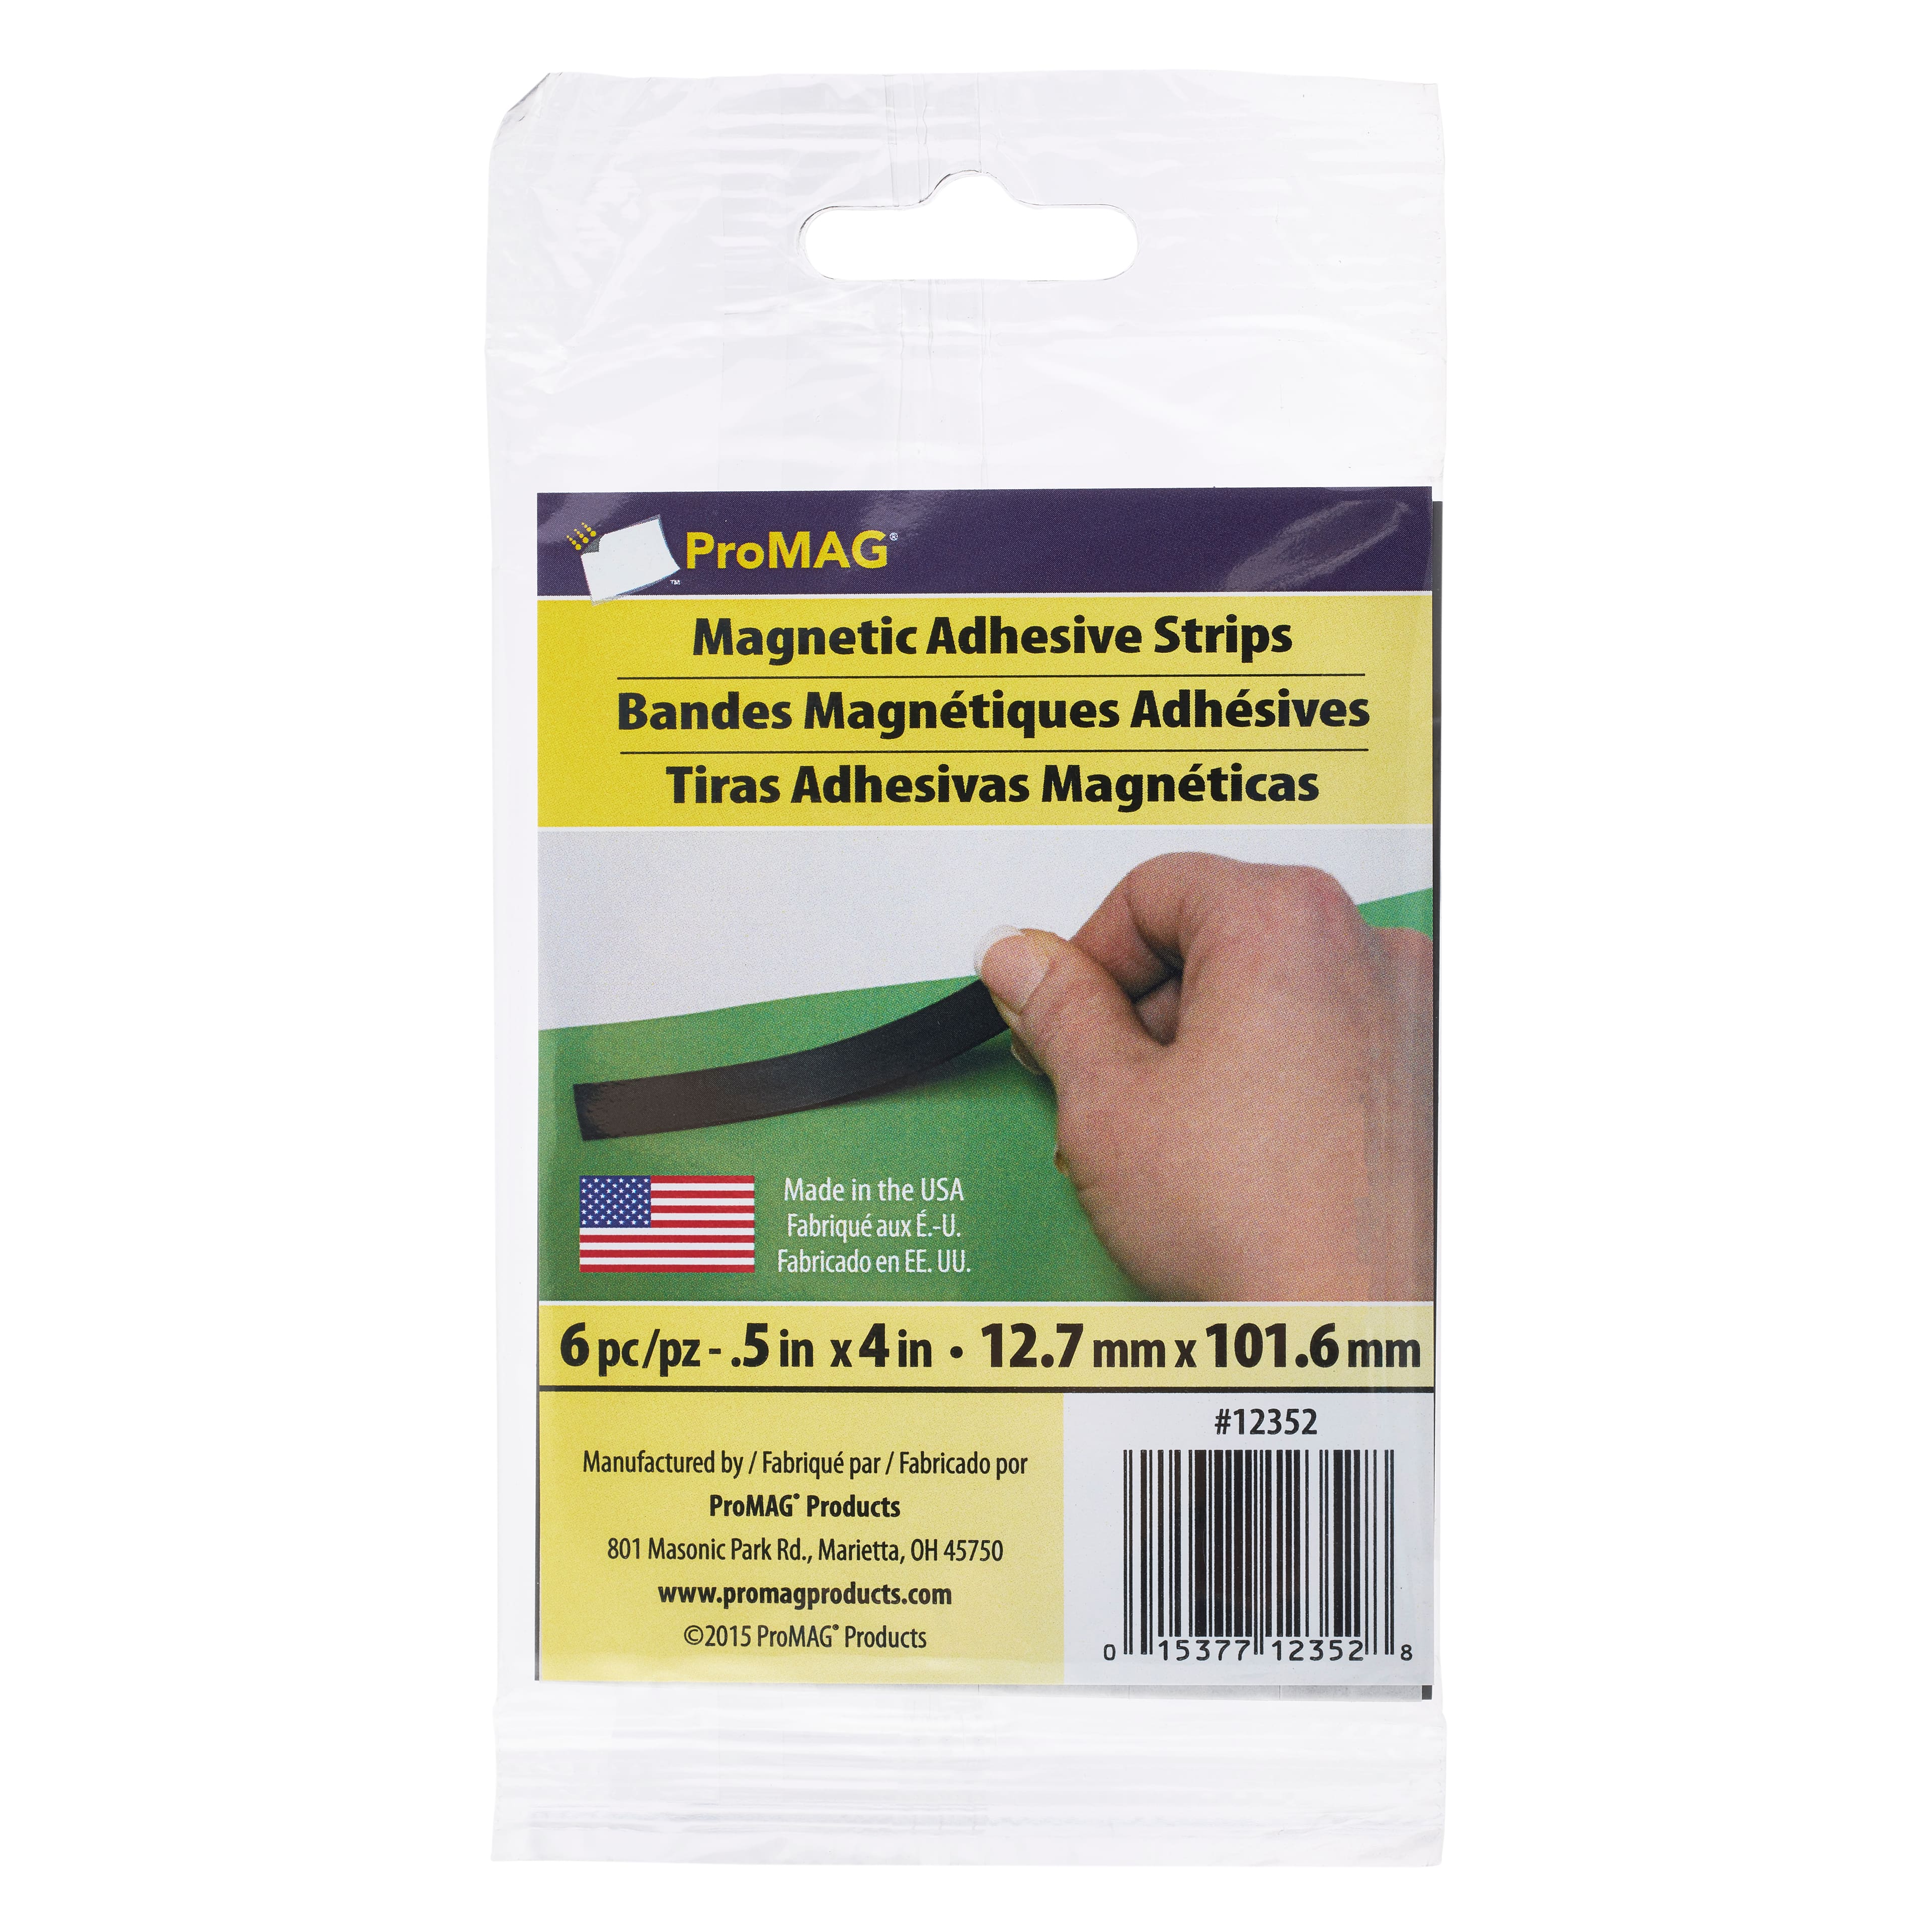 12 Packs: 6 ct. (72 total) Pro MAG® 1/2 x 4 Magnetic Adhesive Strips